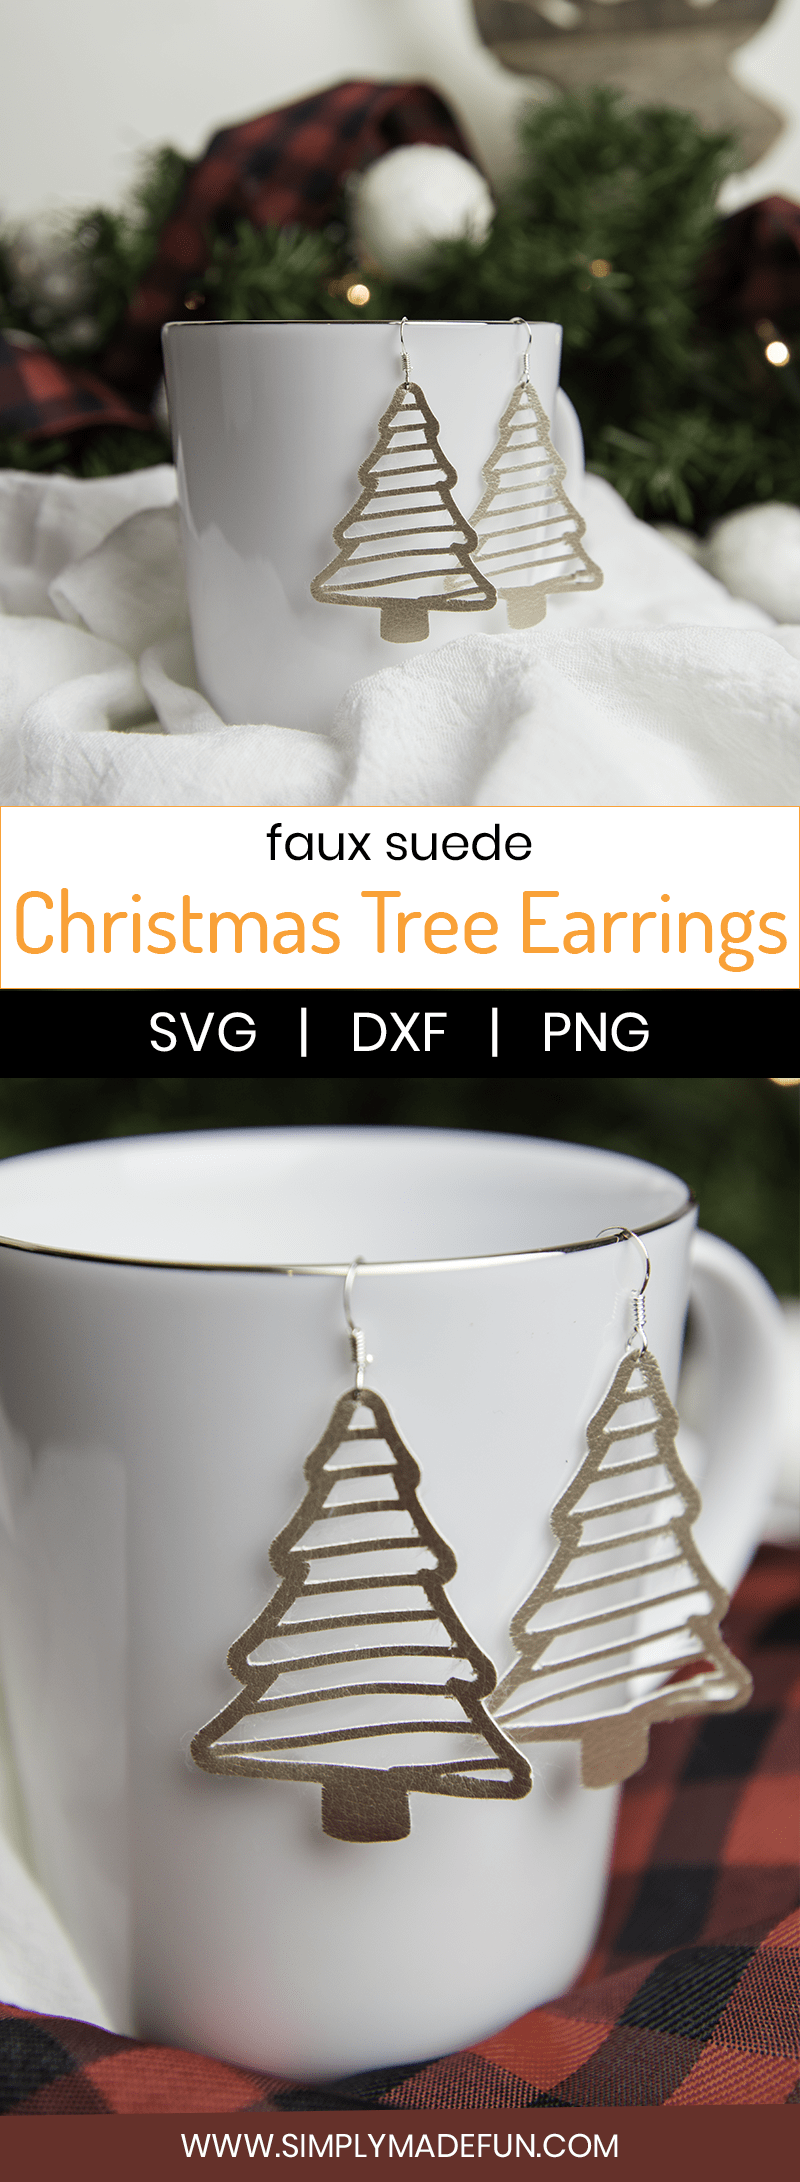 Download Faux Suede Christmas Tree Earrings - Simply Made Fun